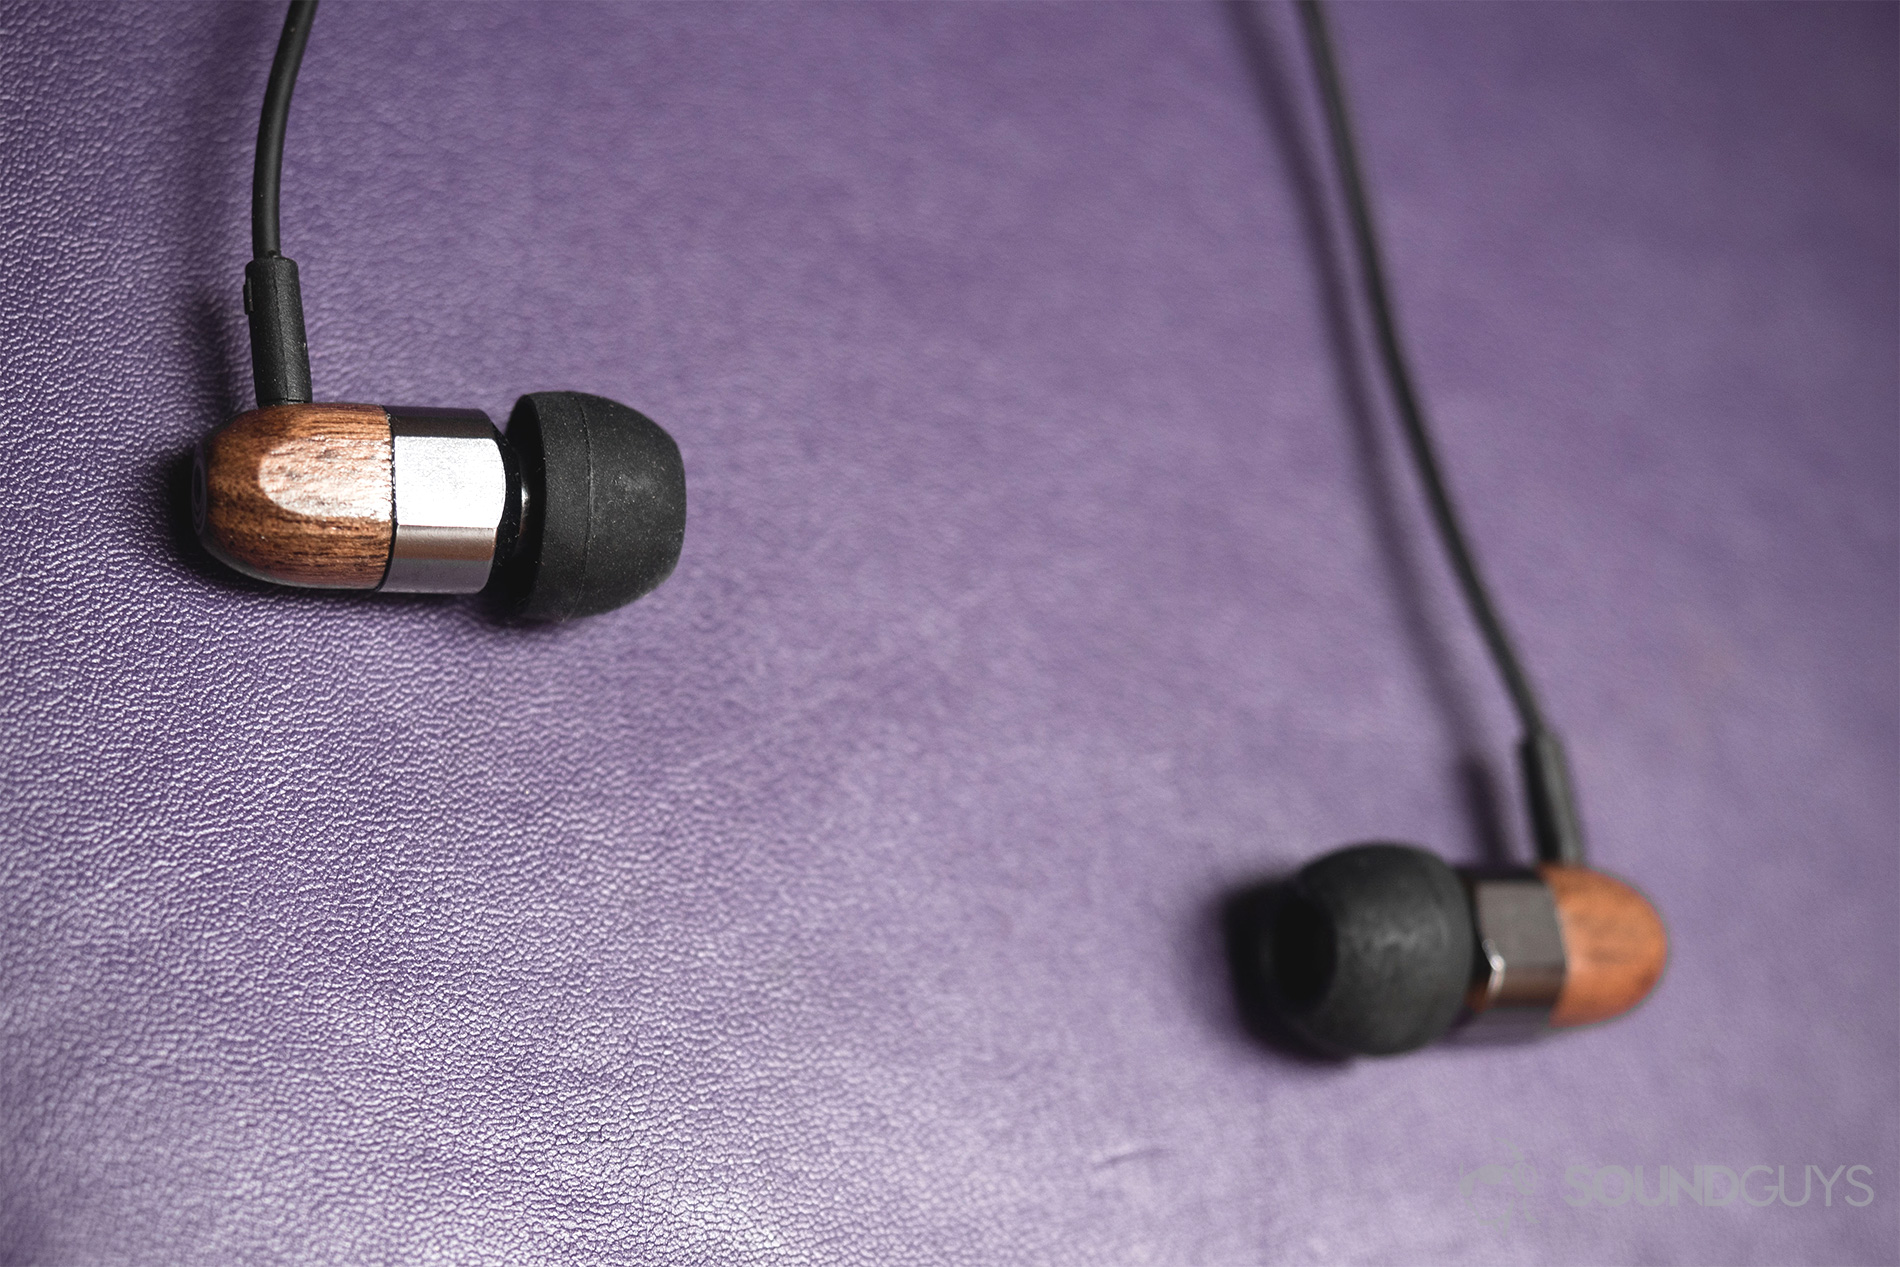 Thinksound ts03+mic review: The earbuds in front of a purple leatherette surface.